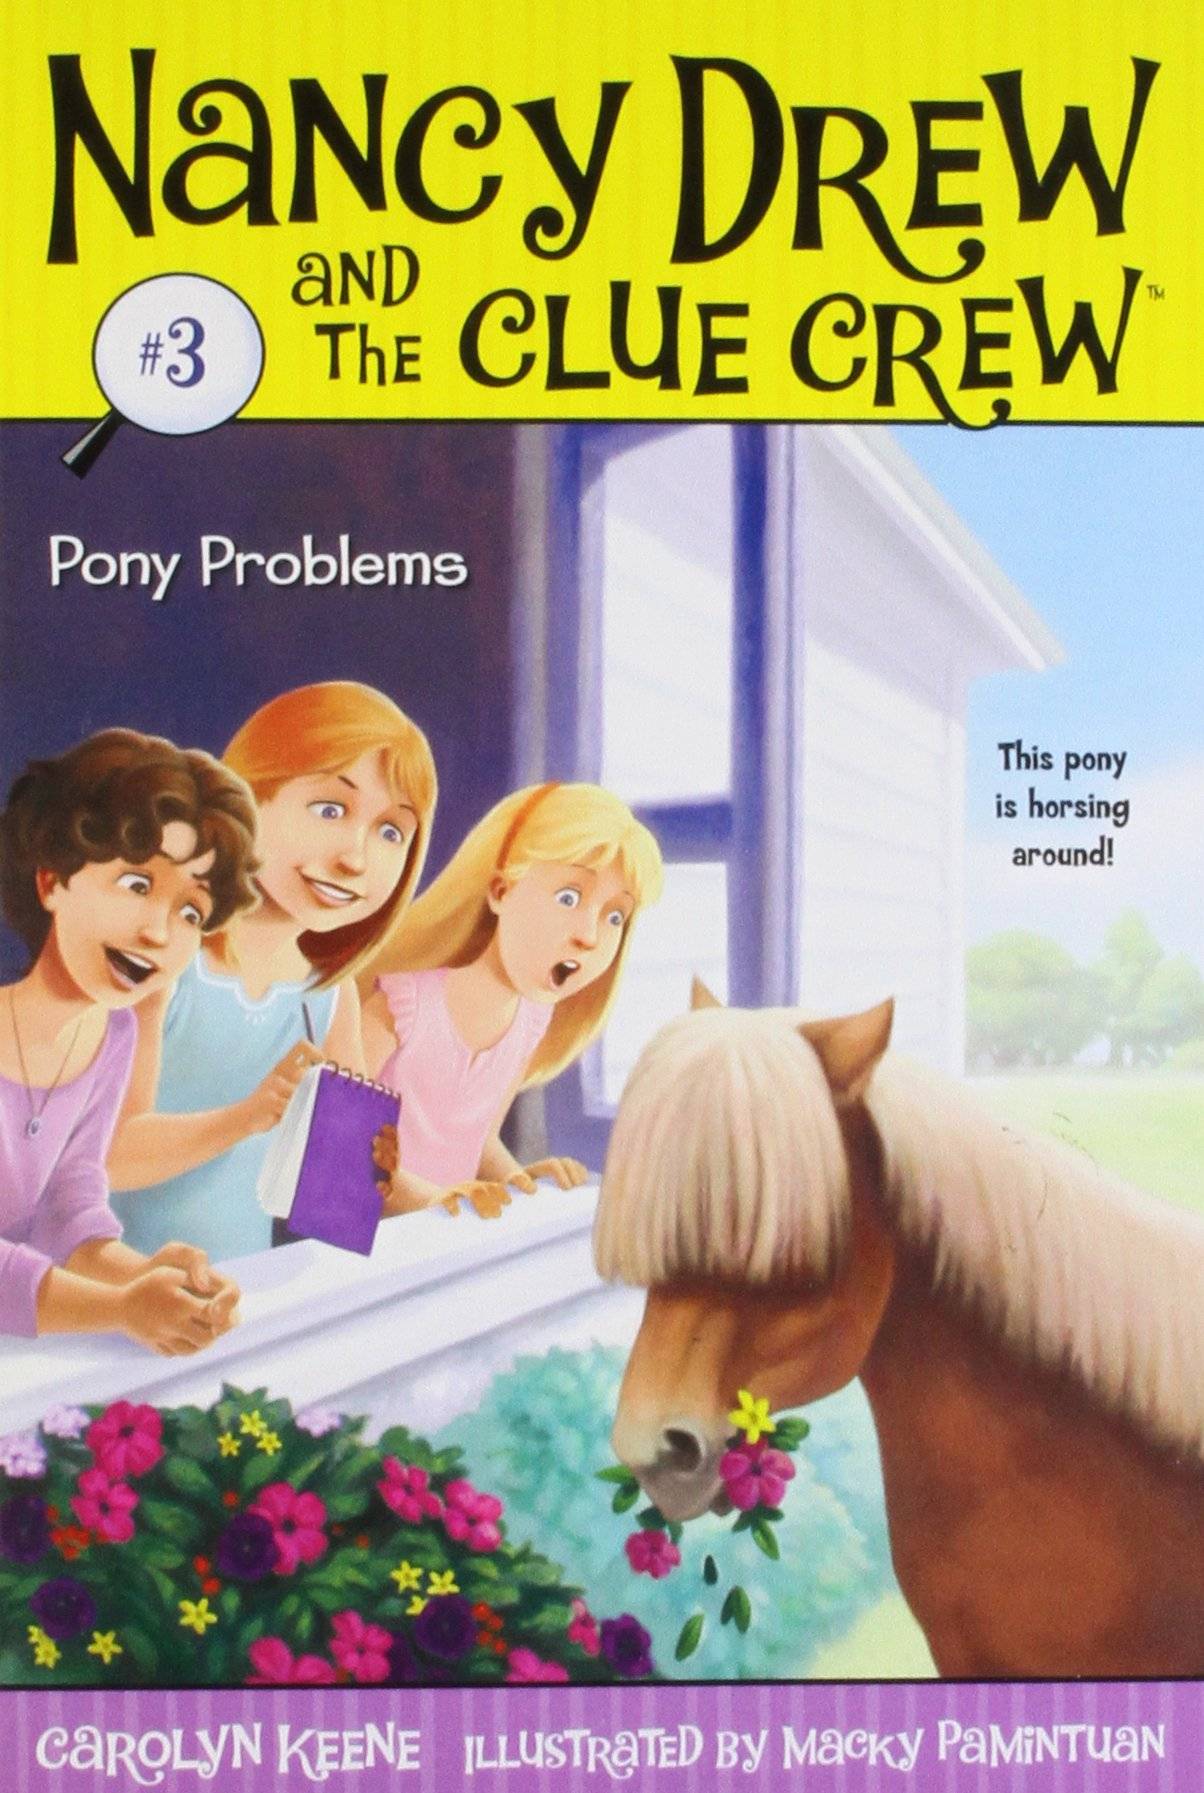 IMG : The Nancy Drew and the Clue Crew  Pony Problems #3